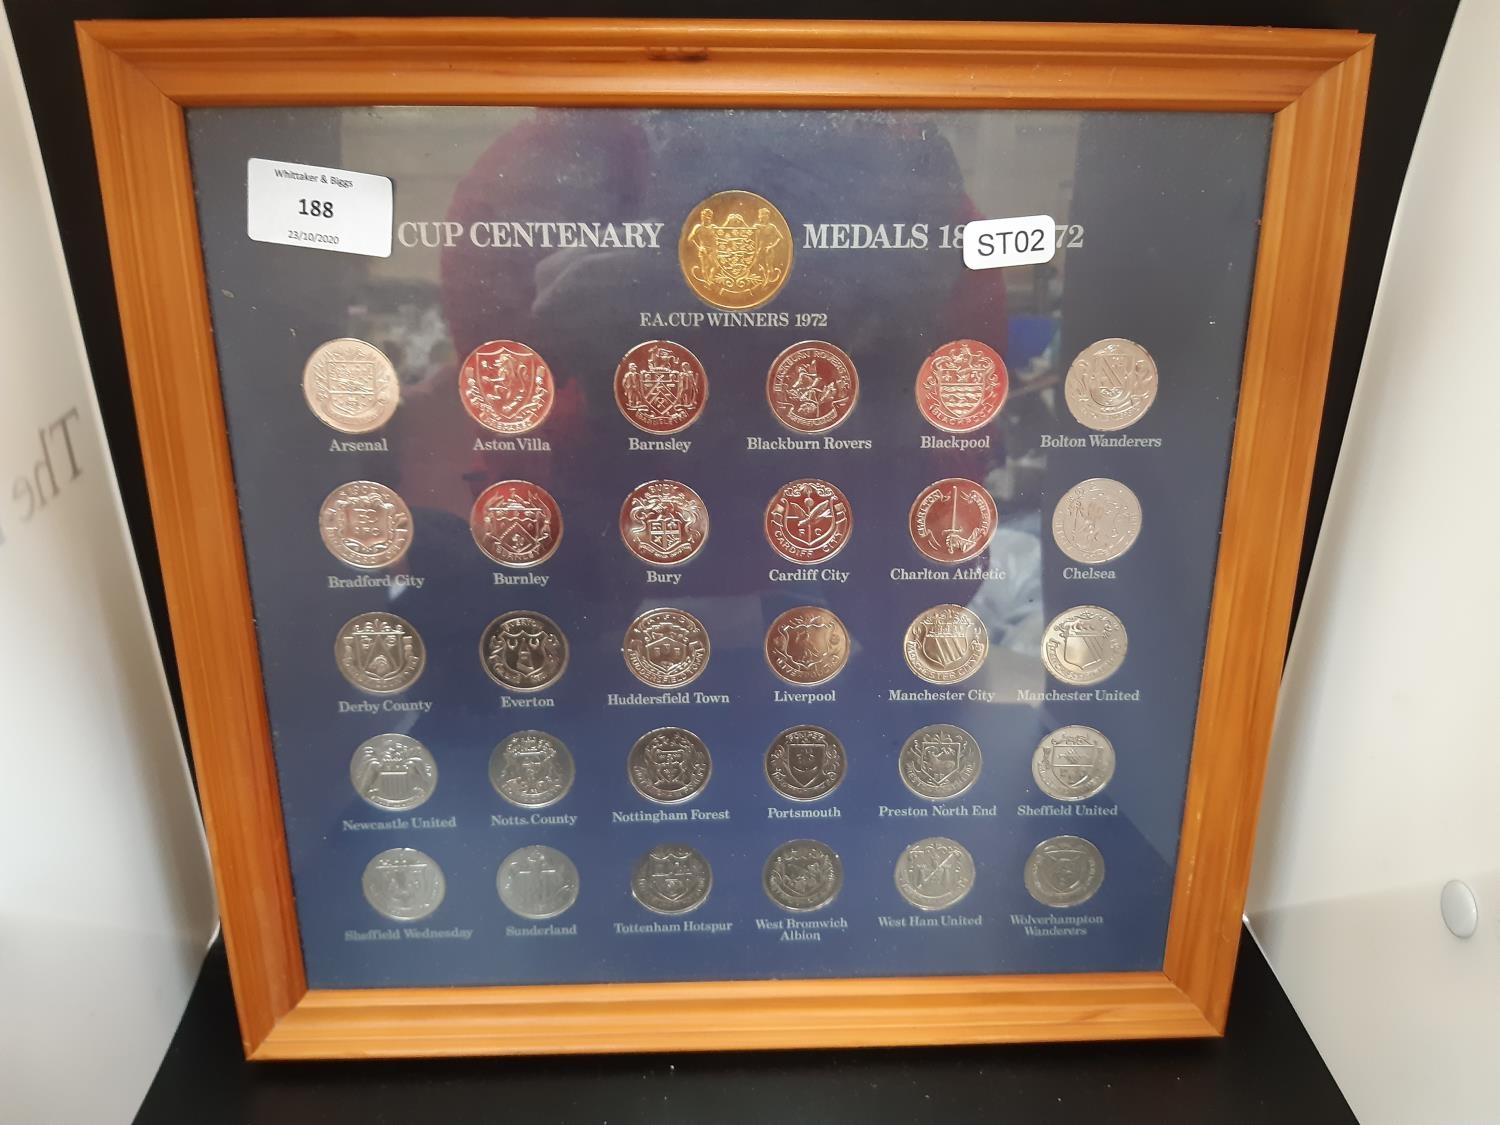 A framed complete set of Esso FA Cup centenary coins from 1872-1972